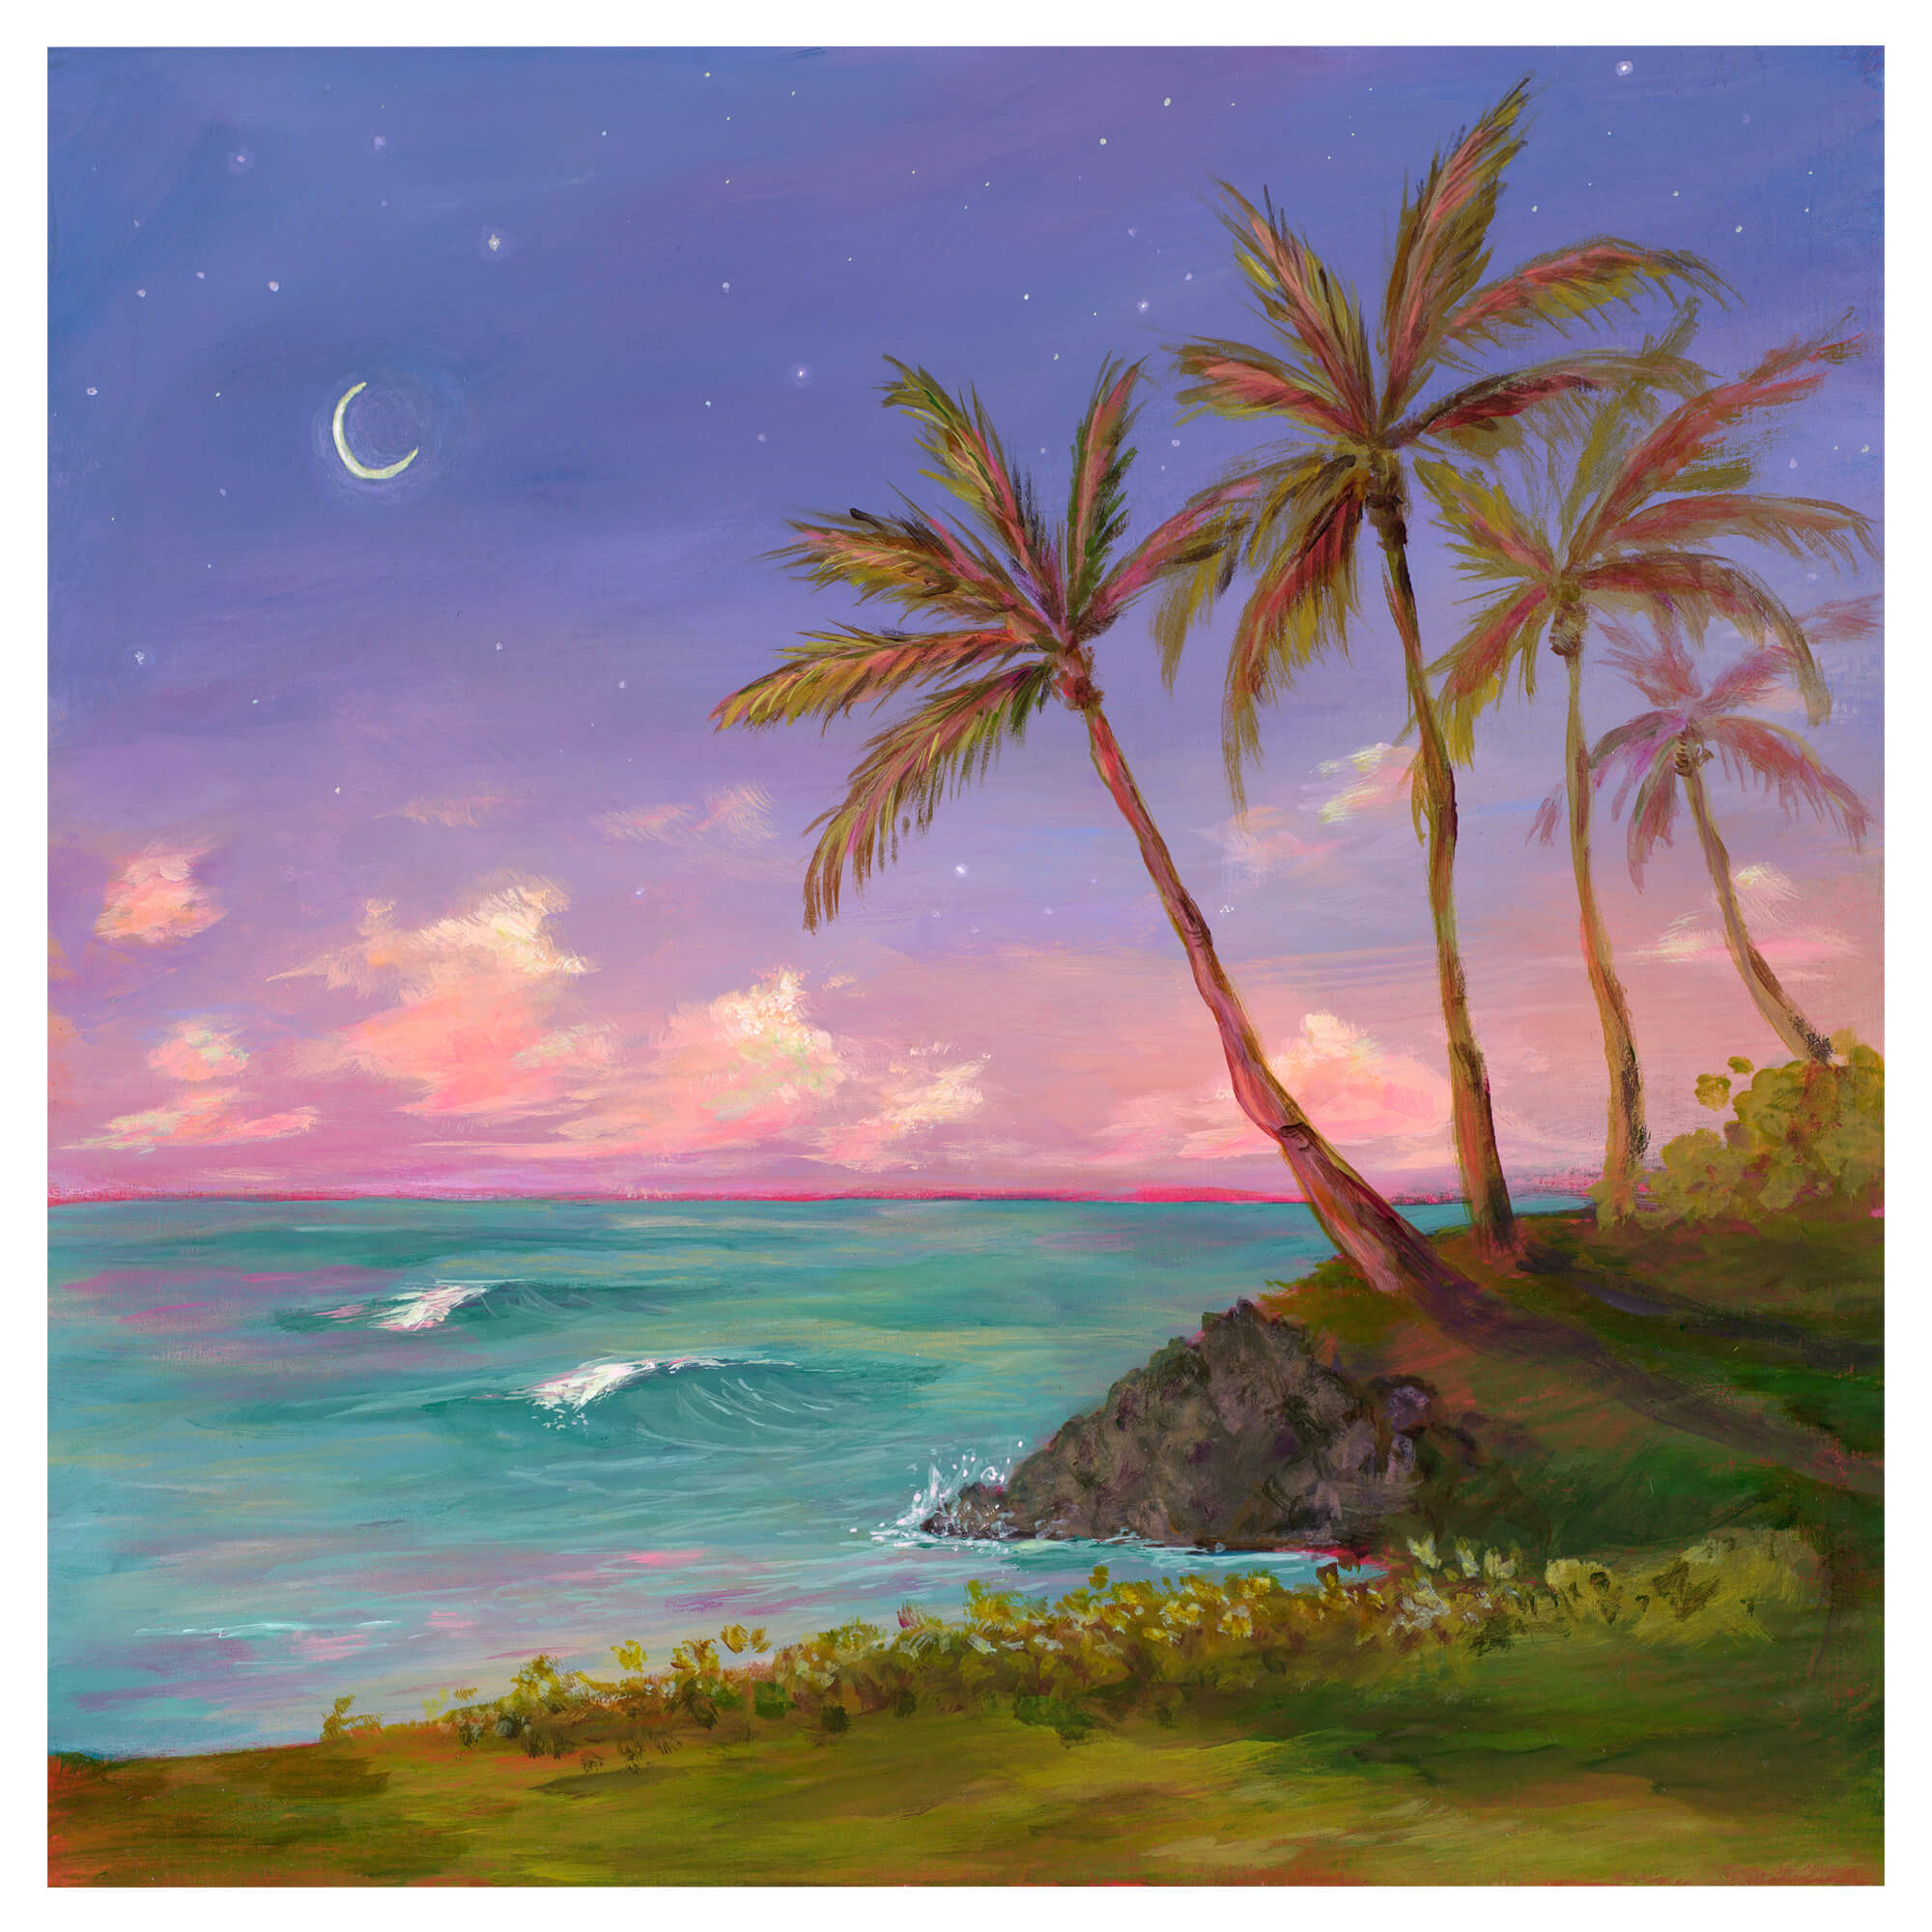 A cliff with coconut trees and an ocean view by Hawaii artist Lindsay Wilkins